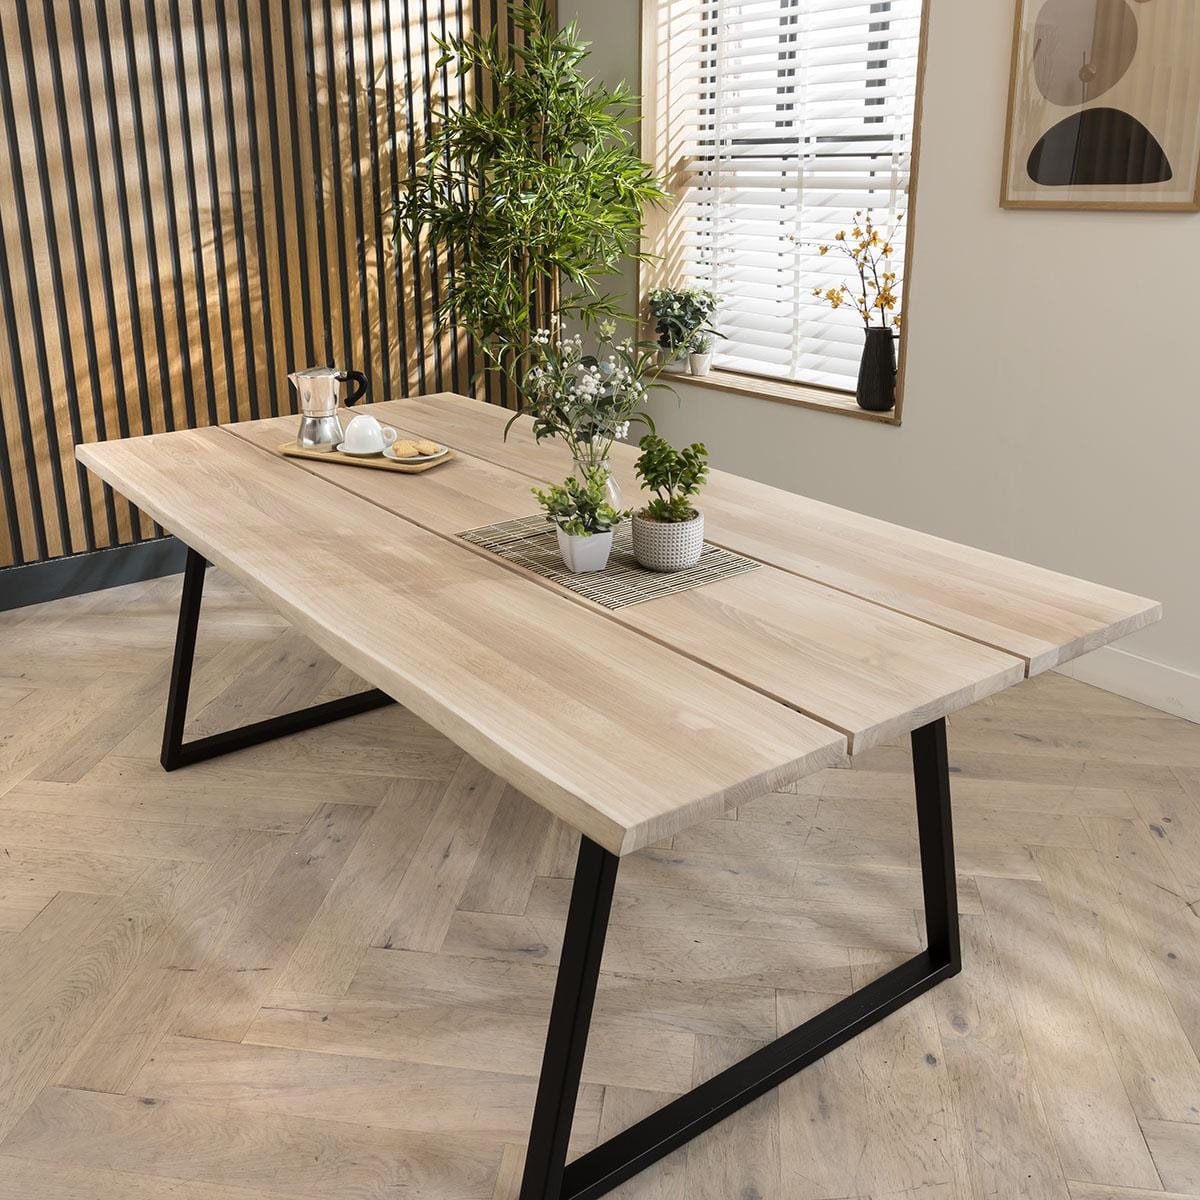 Quatropi Forest 8 Seater Solid Oak Dining Table - White Oiled 200cm